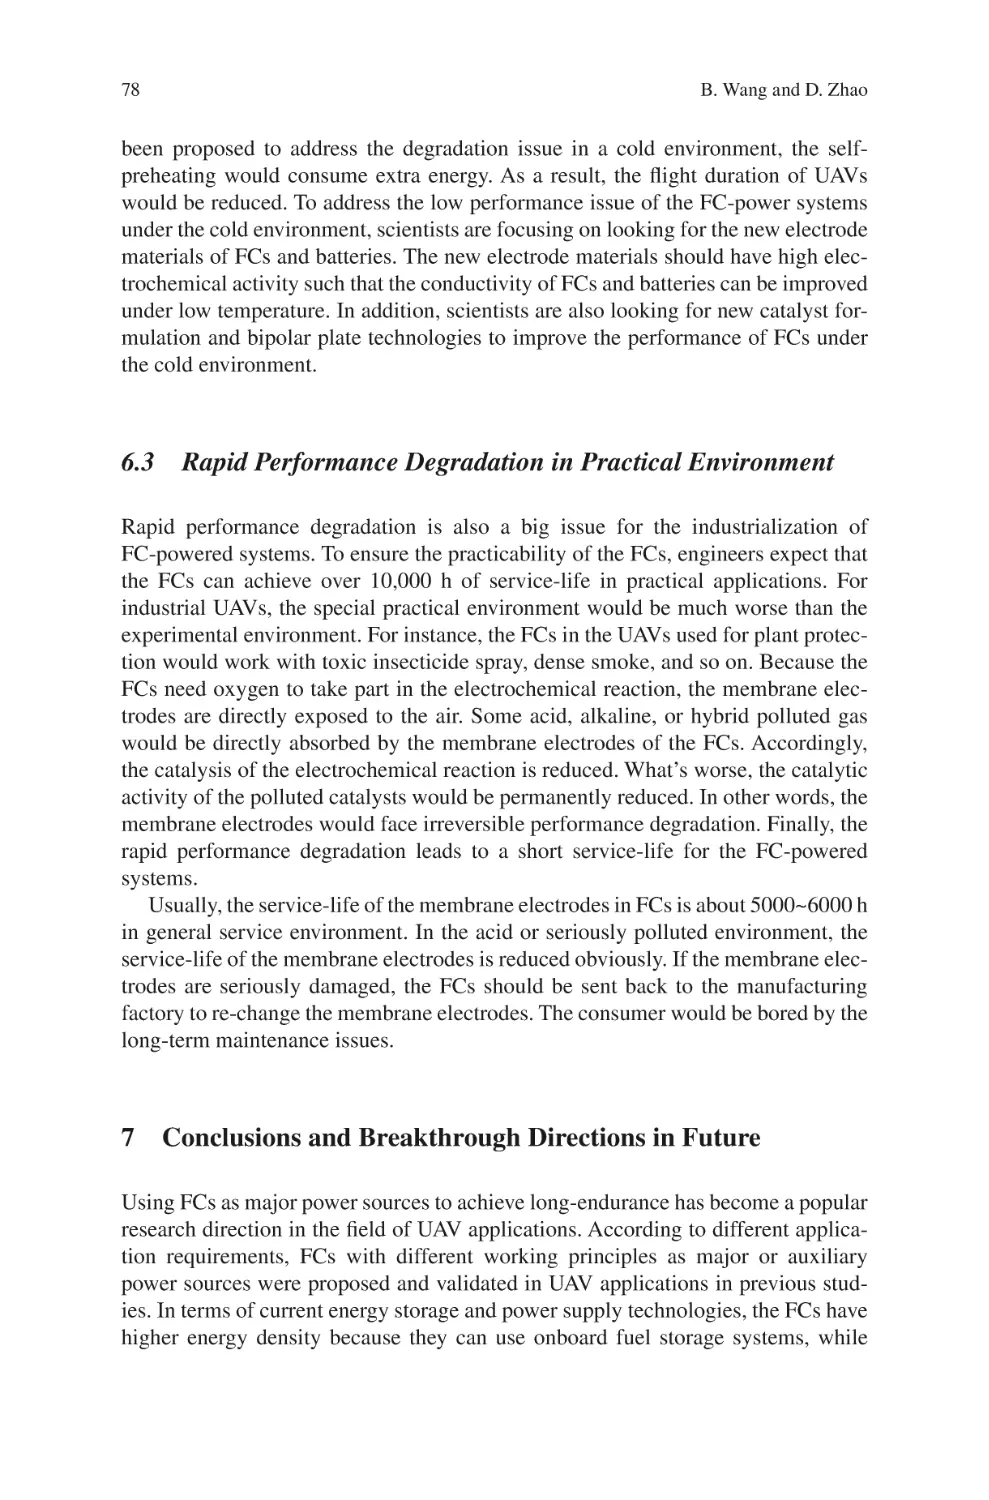 6.3 Rapid Performance Degradation in Practical Environment
7 Conclusions and Breakthrough Directions in Future